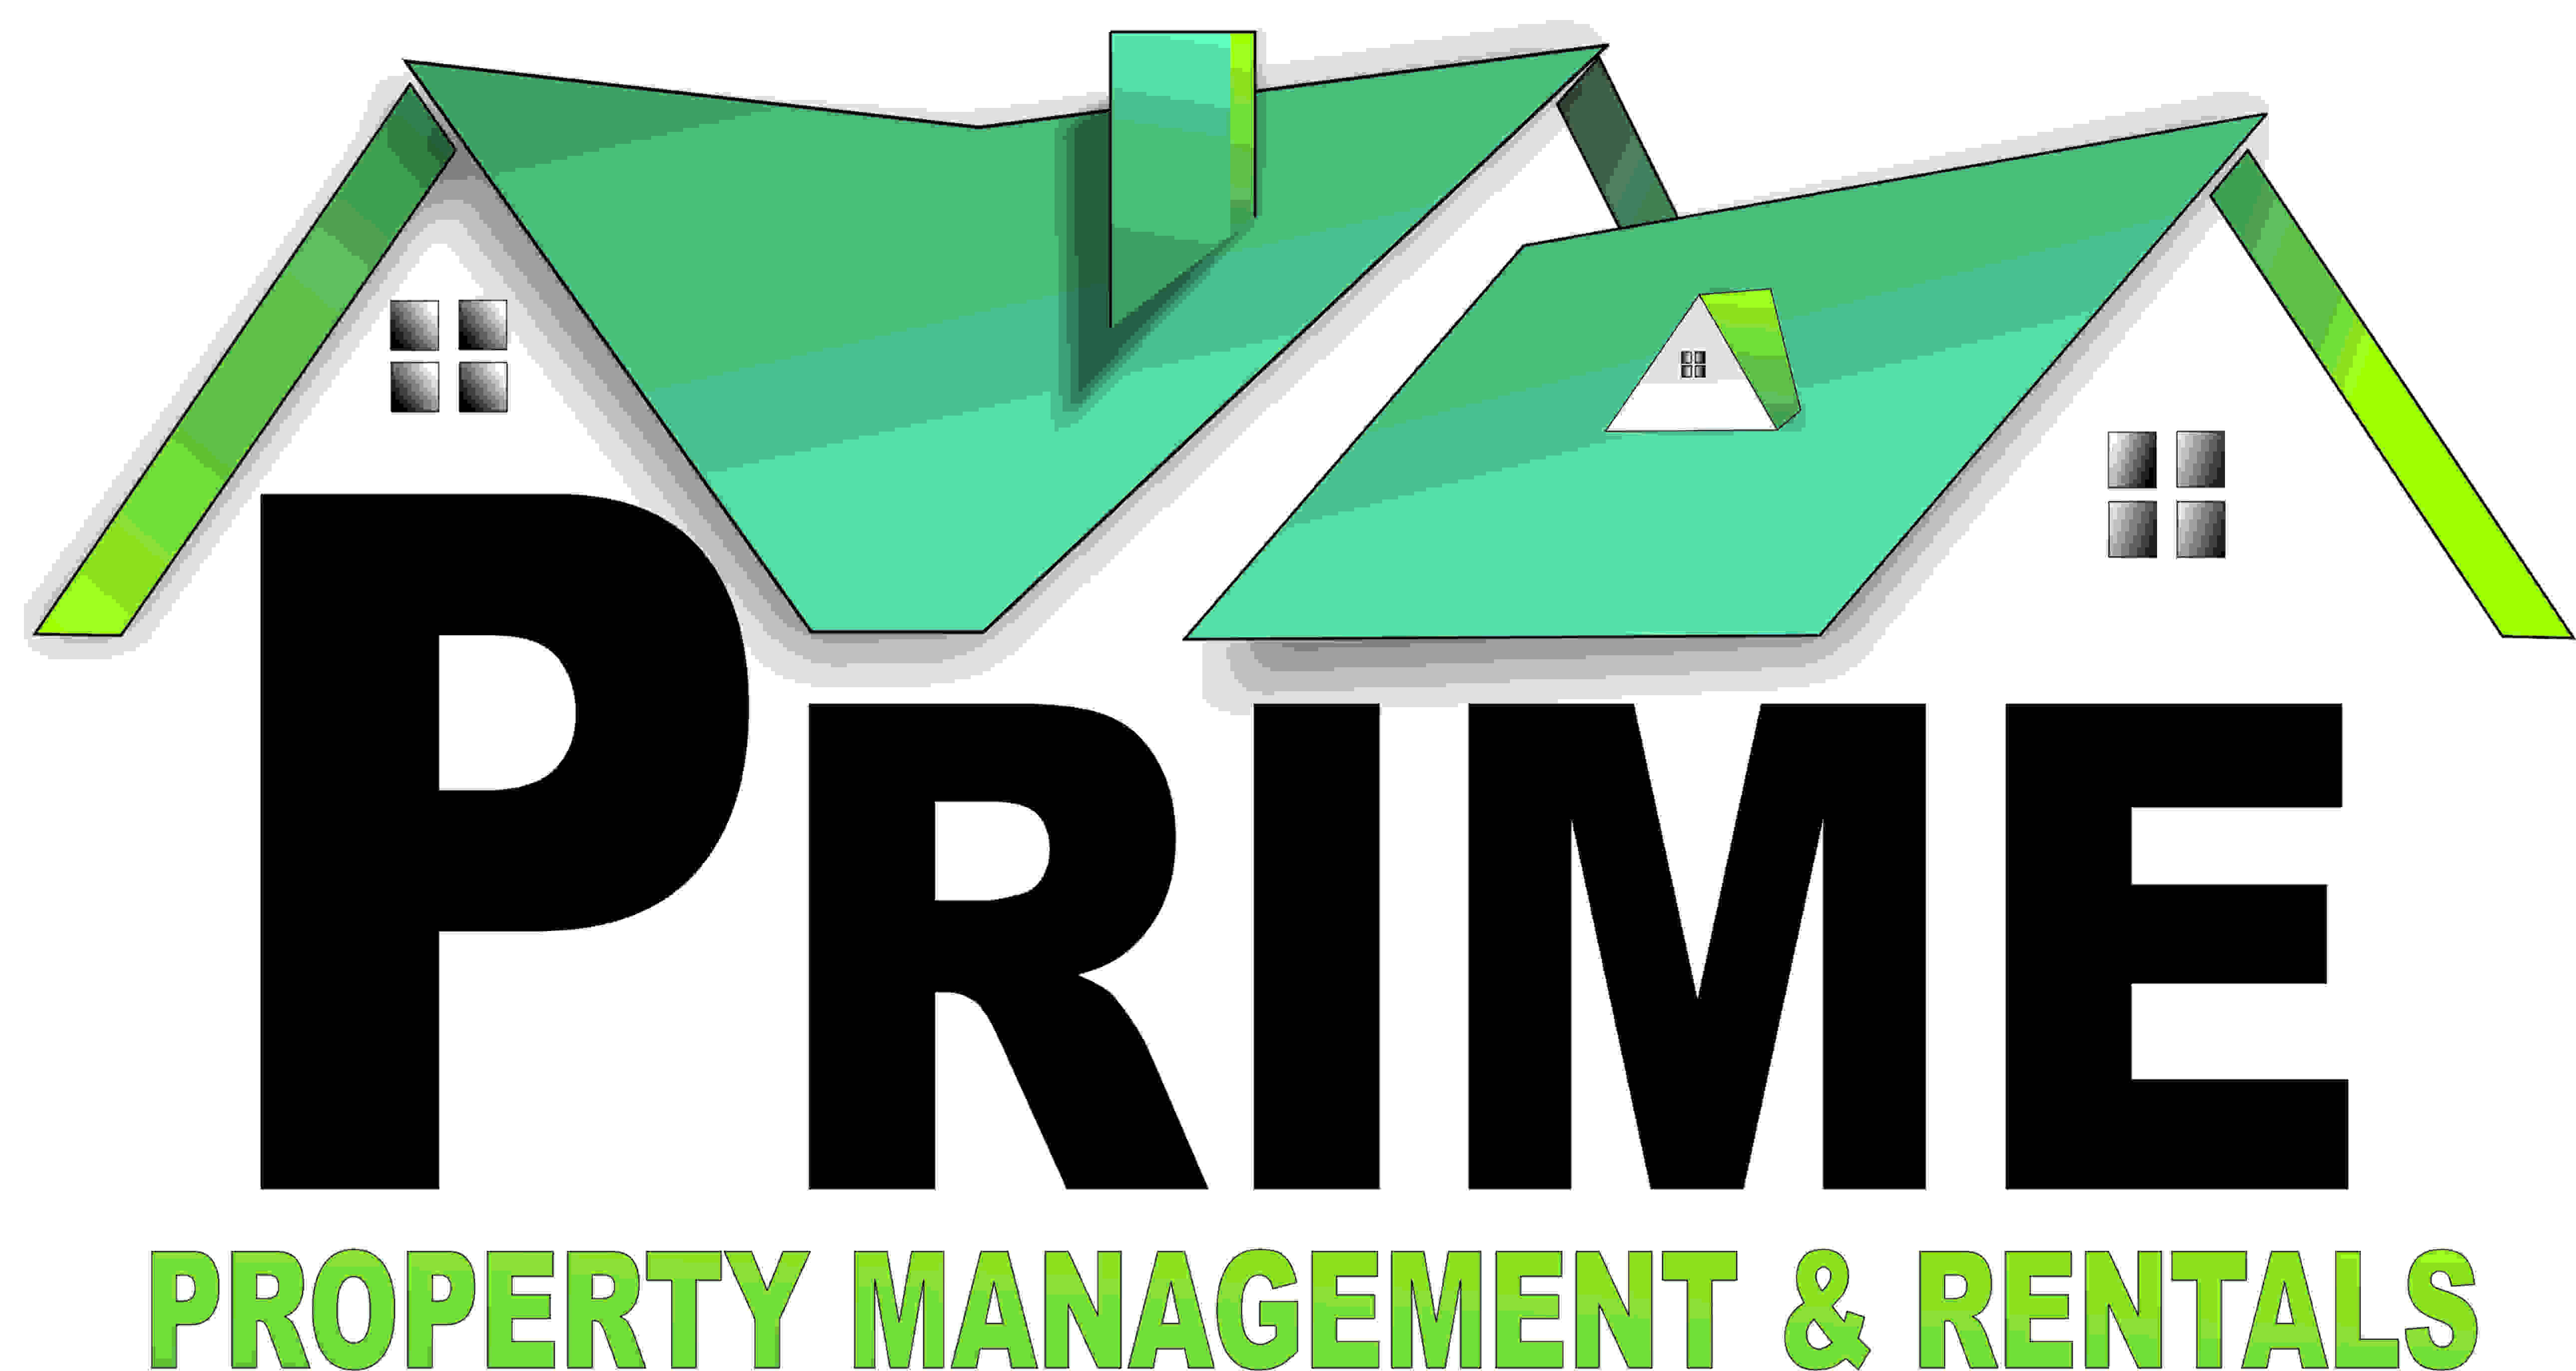 Tampa Property Management Companies Property Management